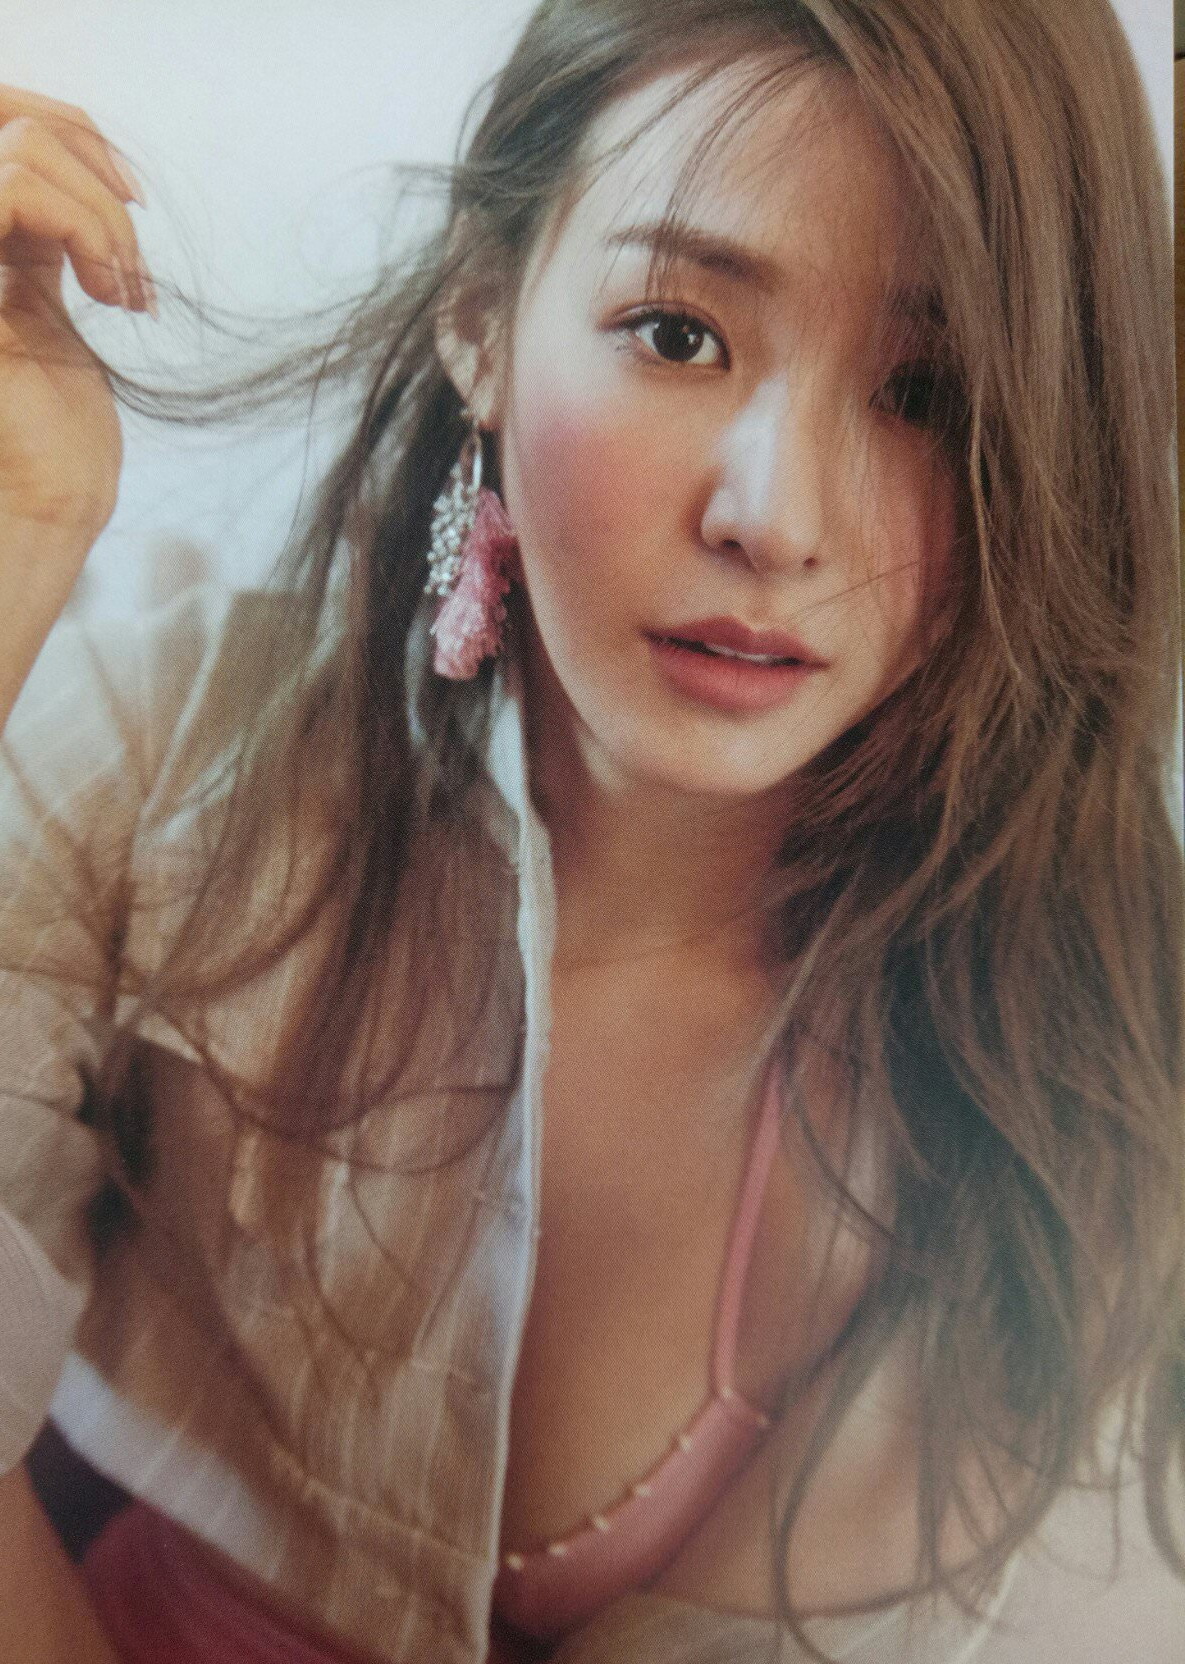 SNSD Tiffany Young Boobs, SNSD Tiffany Young Cleavage, SNSD Tiffany boobs, SNSD Tiffany topless, SNSD Tiffany nude, SNSD Tiffany young ass,